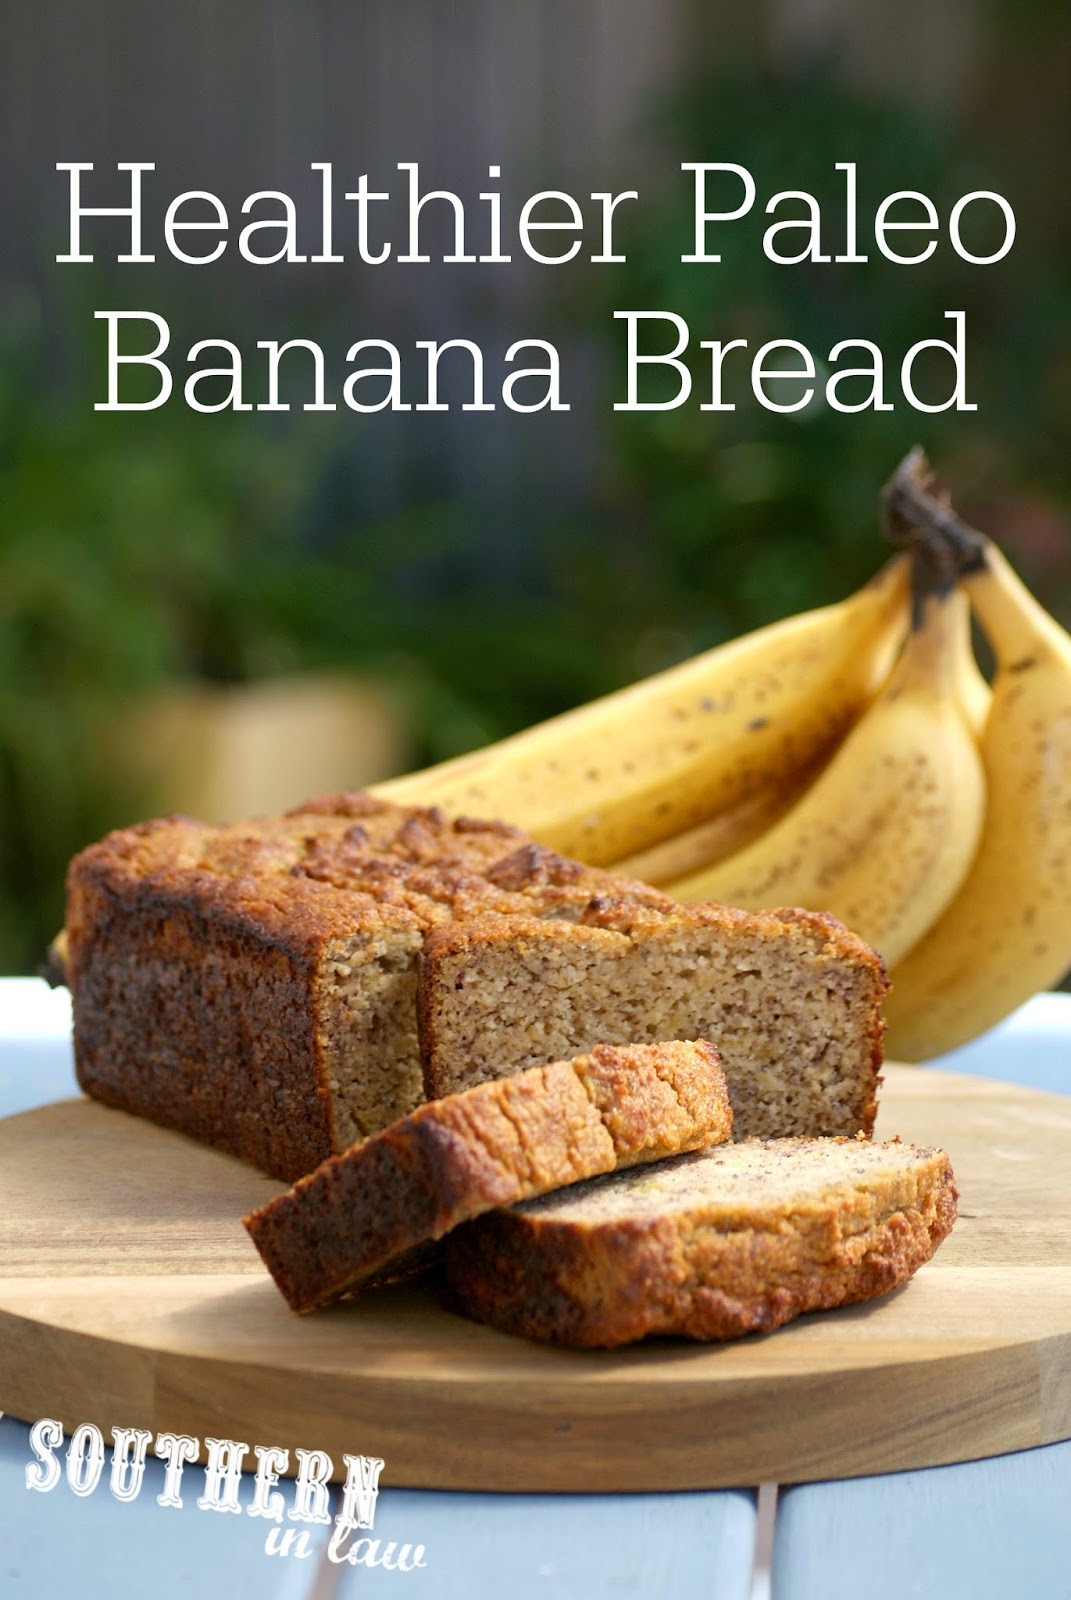 Low Carb Low Fat Bread Recipe
 Southern In Law Recipe The Best Healthy Paleo Banana Bread